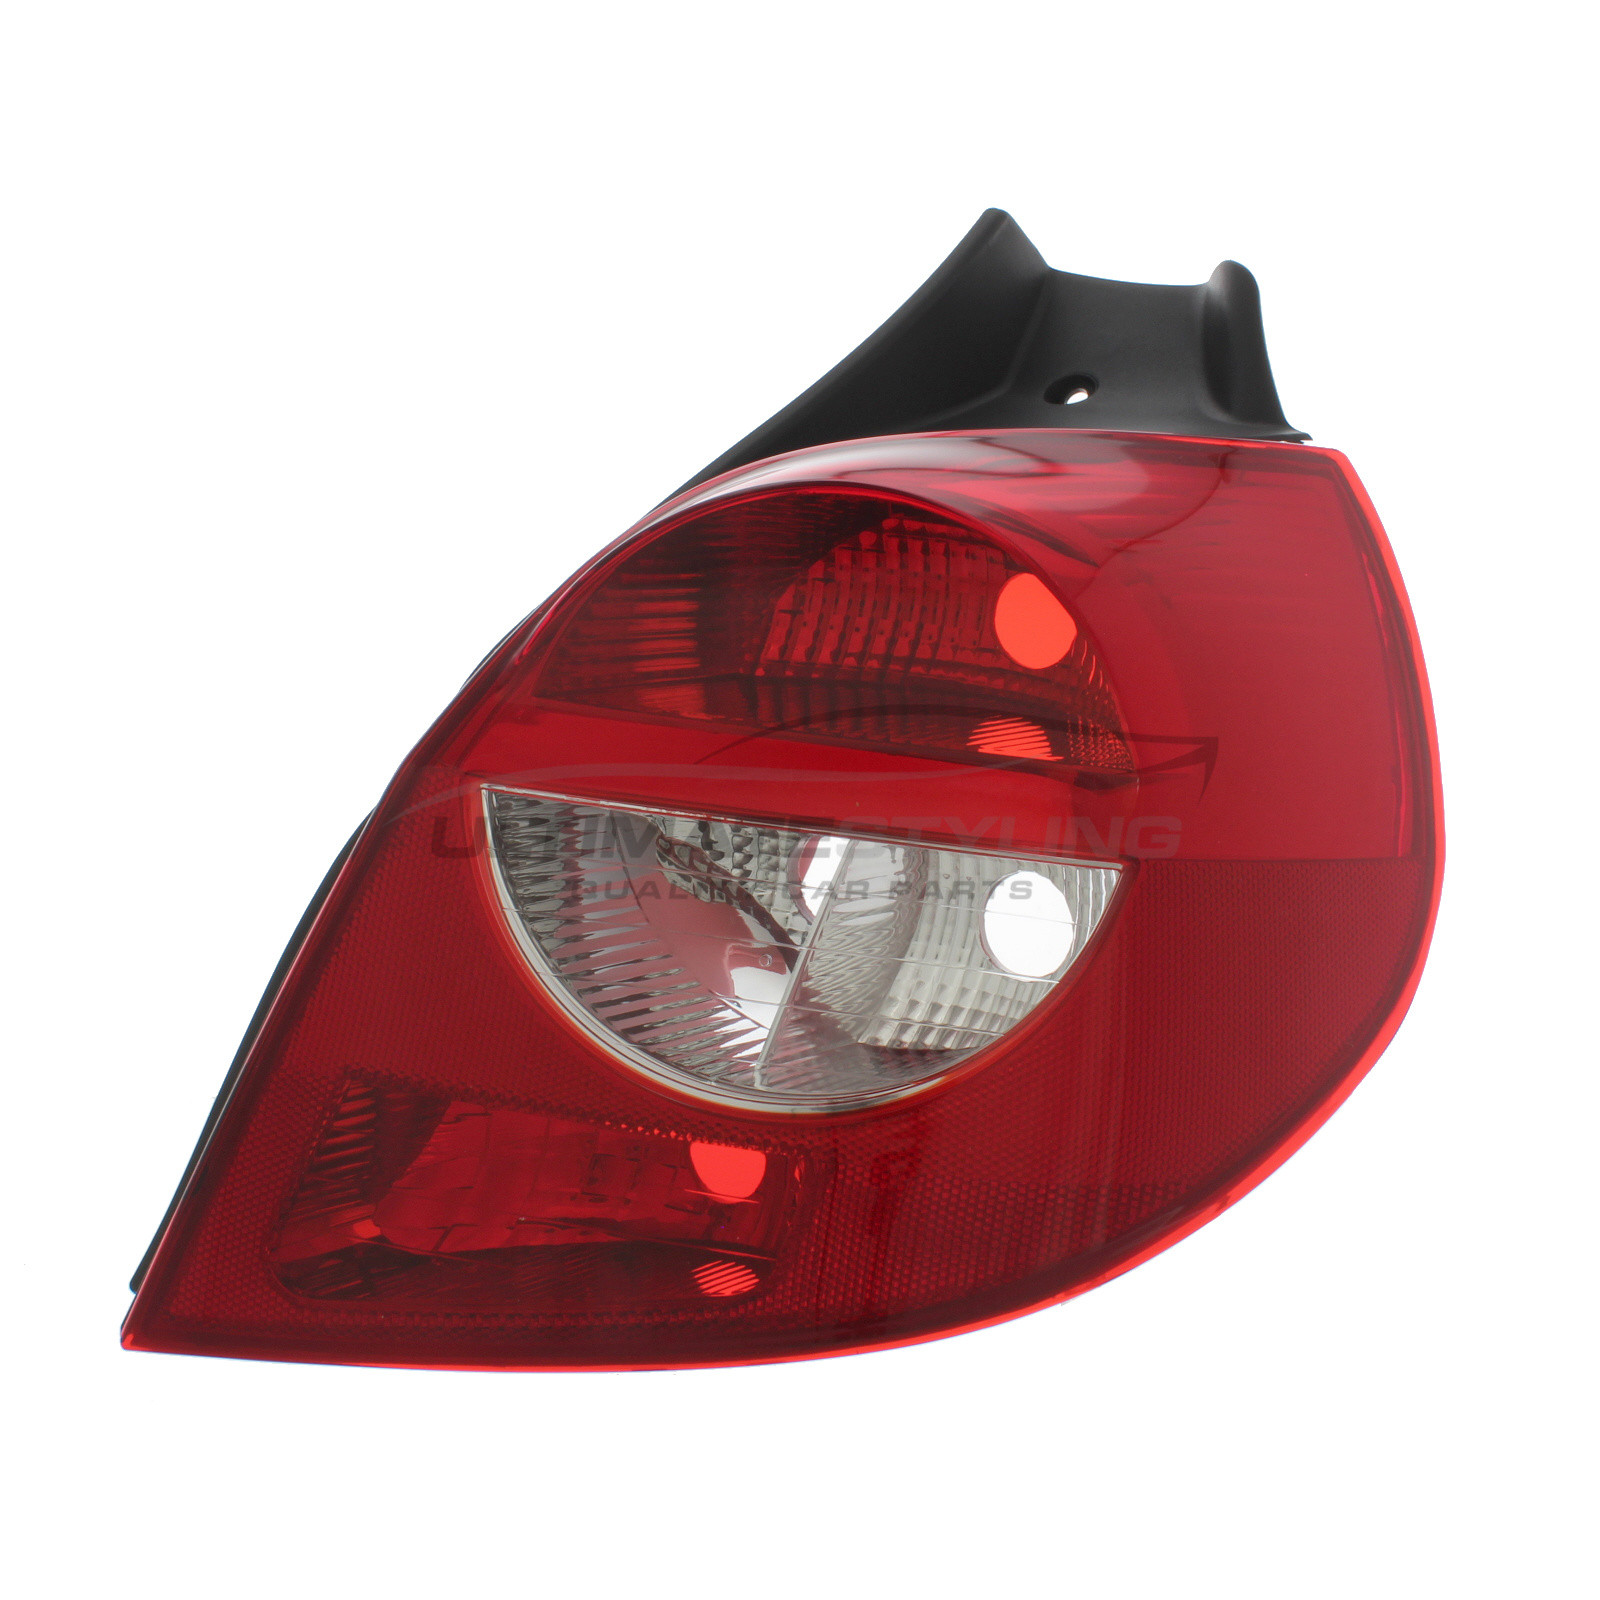 Renault Clio 2005-2009 Non-LED Rear Light / Tail Light Excluding Bulb Holder Drivers Side (RH)